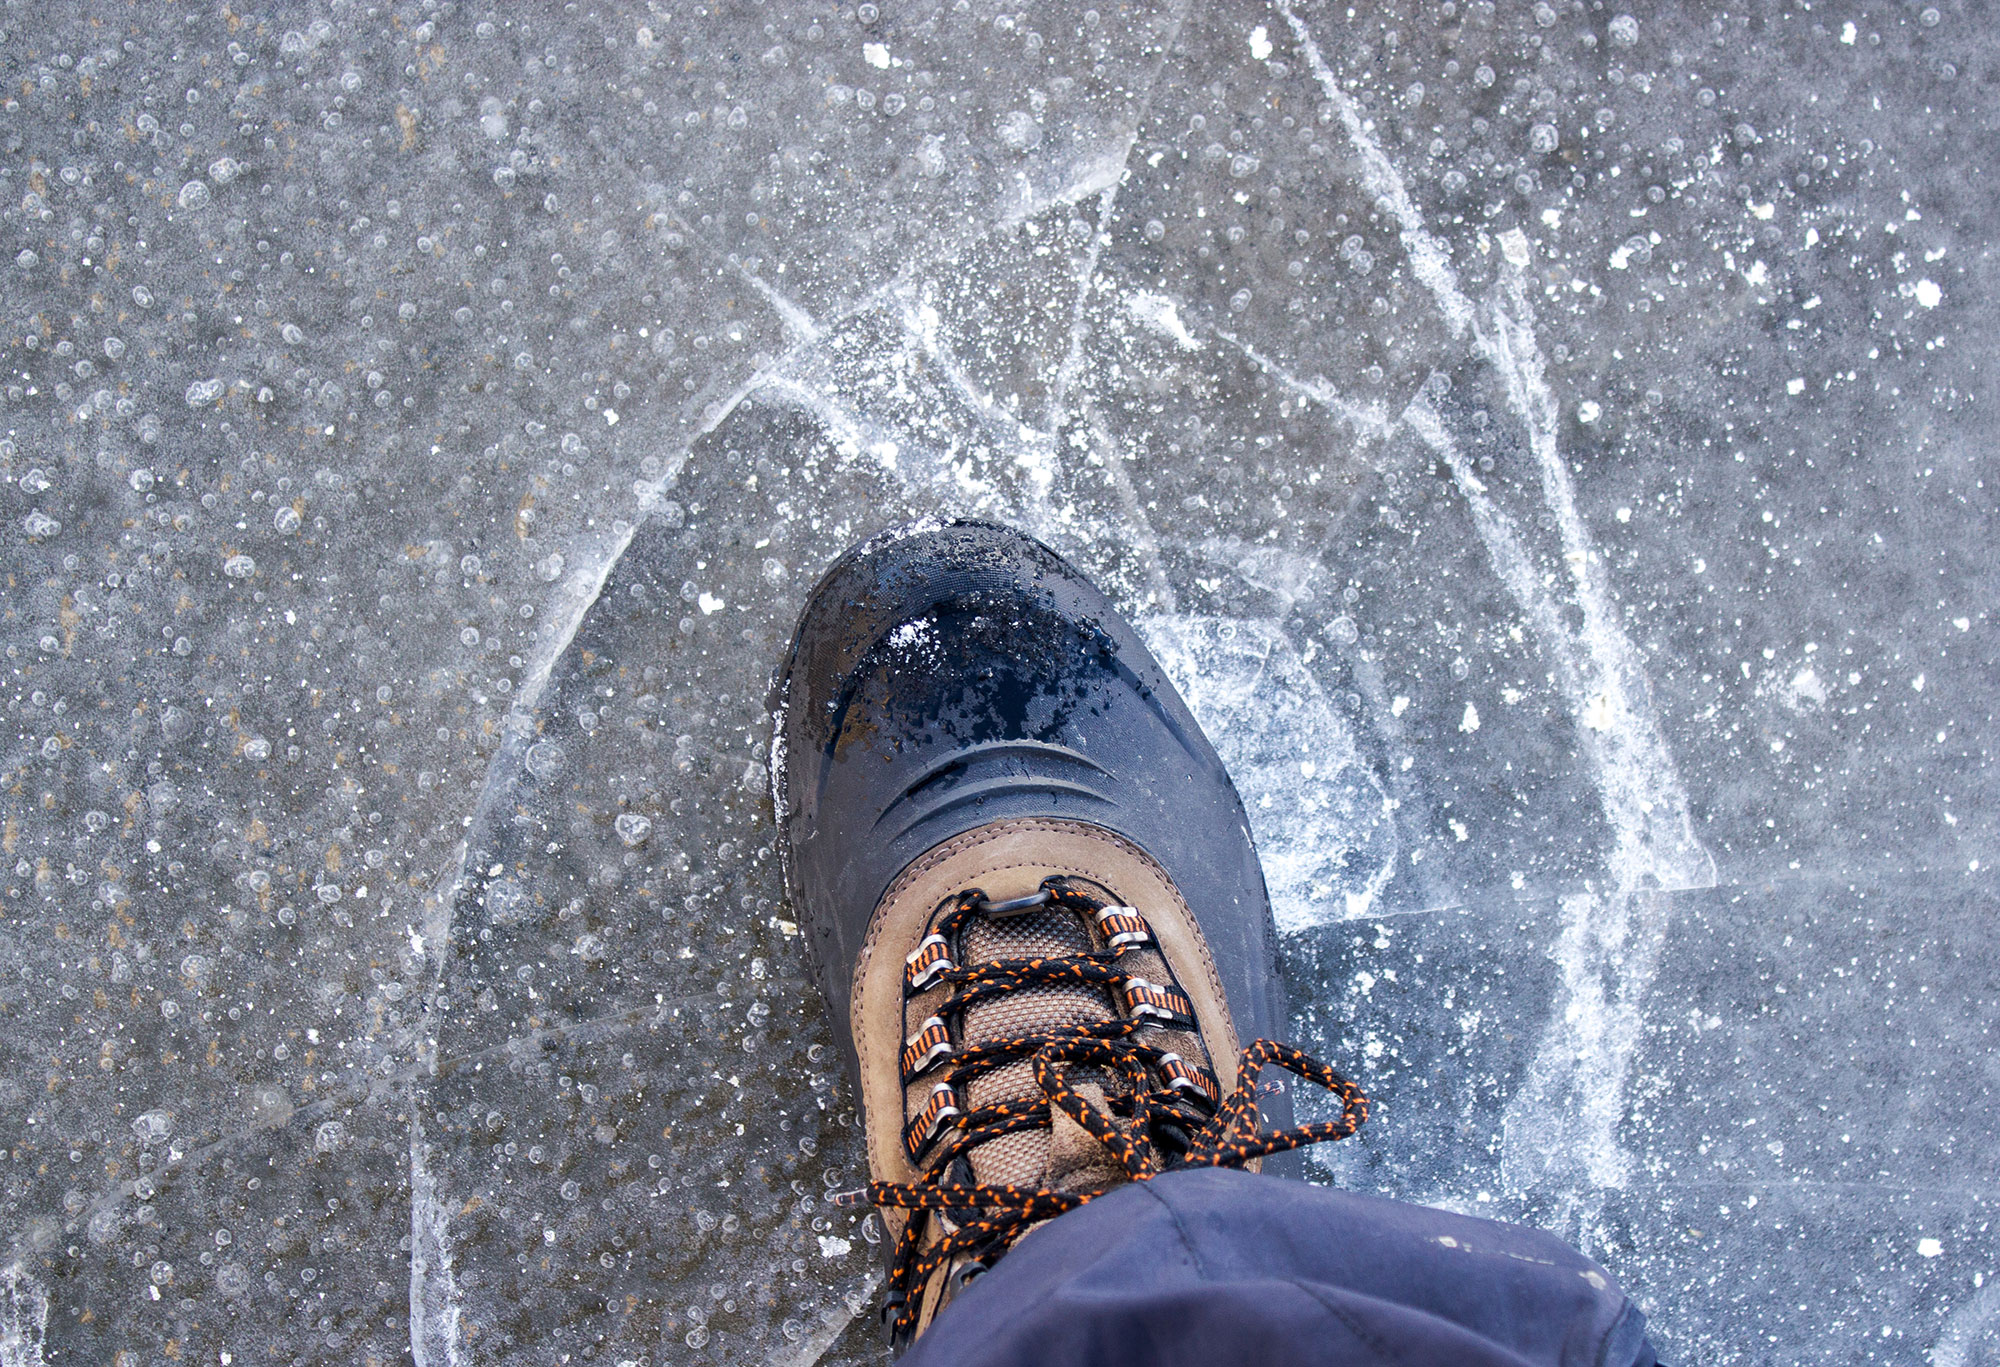 Staying Safe and Savvy on Thin Ice